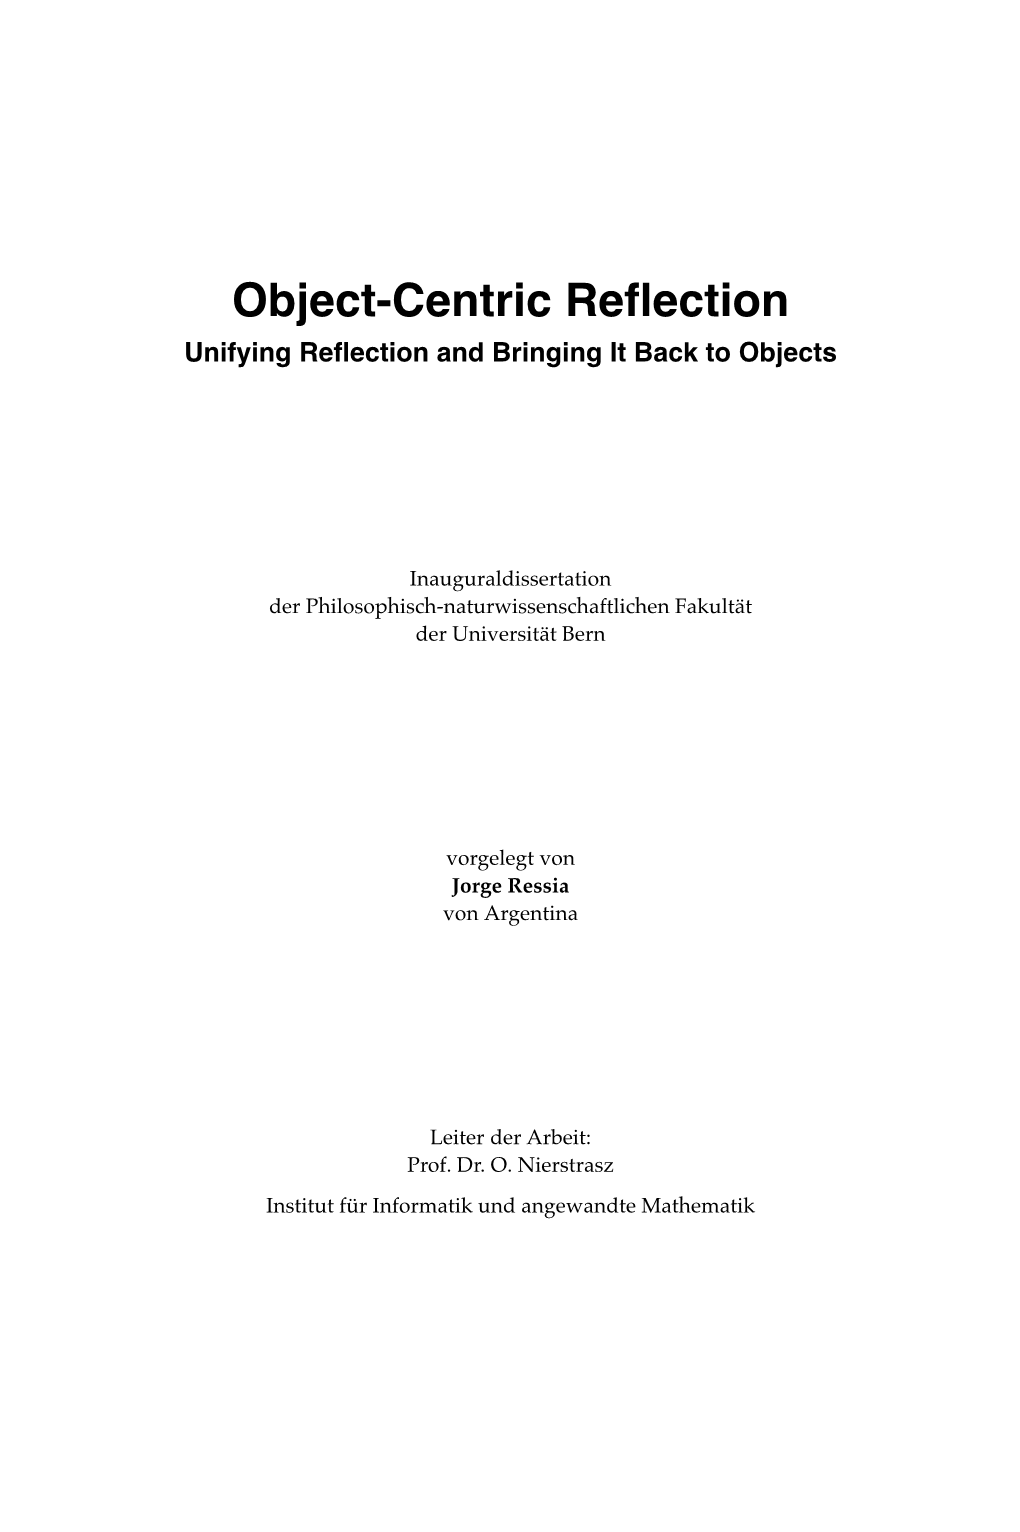 Object-Centric Reflection